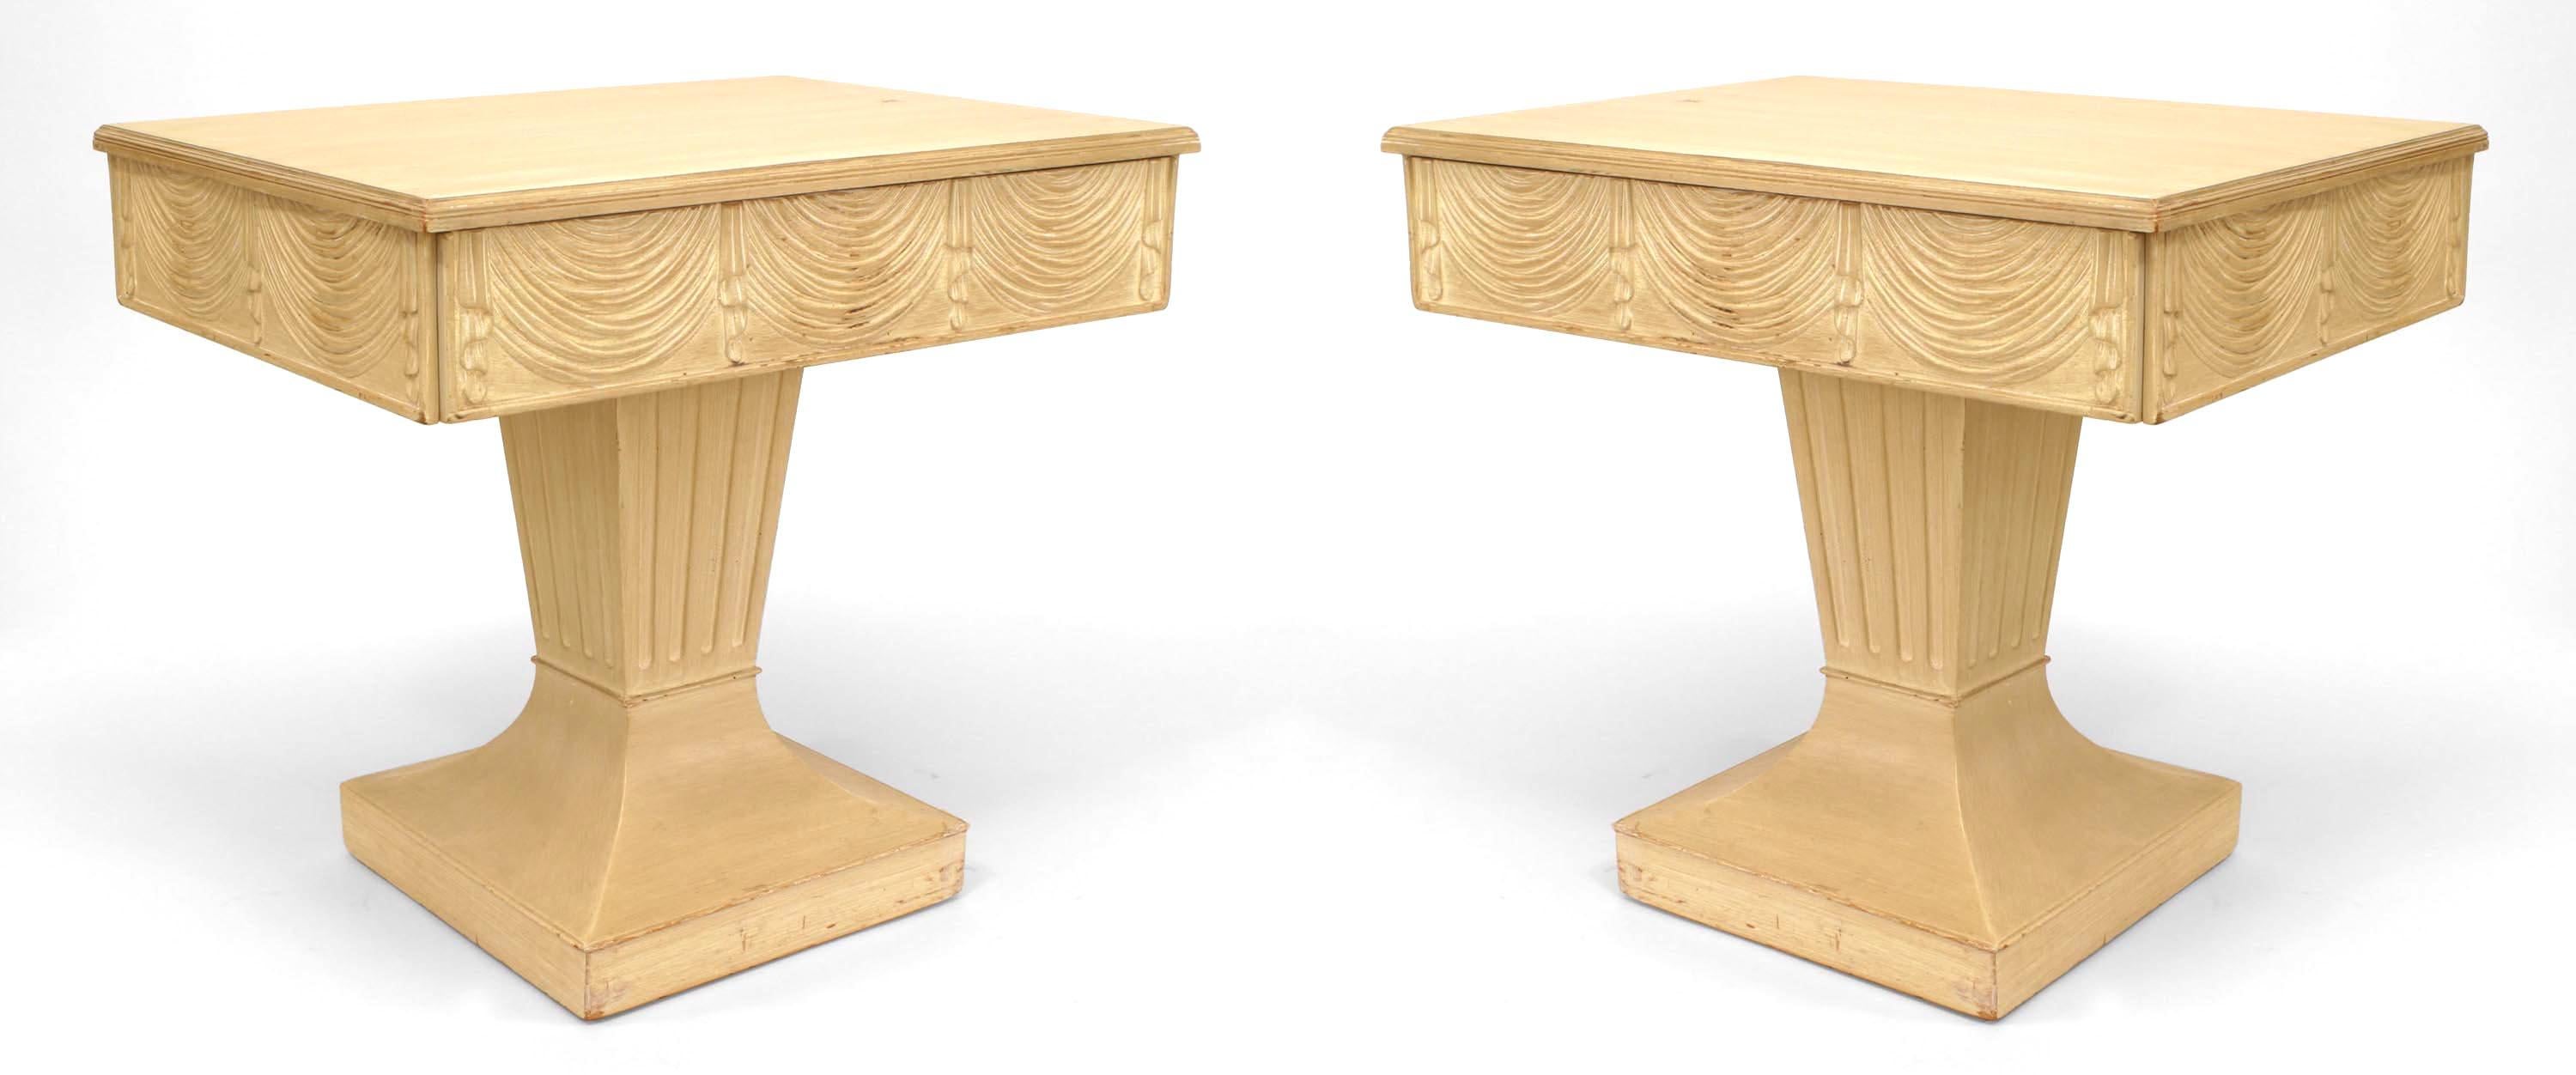 Pair of American Art Moderne bleached end tables with swag carved design on 3 sides and a drawer supported on a square fluted pedestal base. (Attributed to GROSFELD HOUSE) (PRICED AS Pair)
